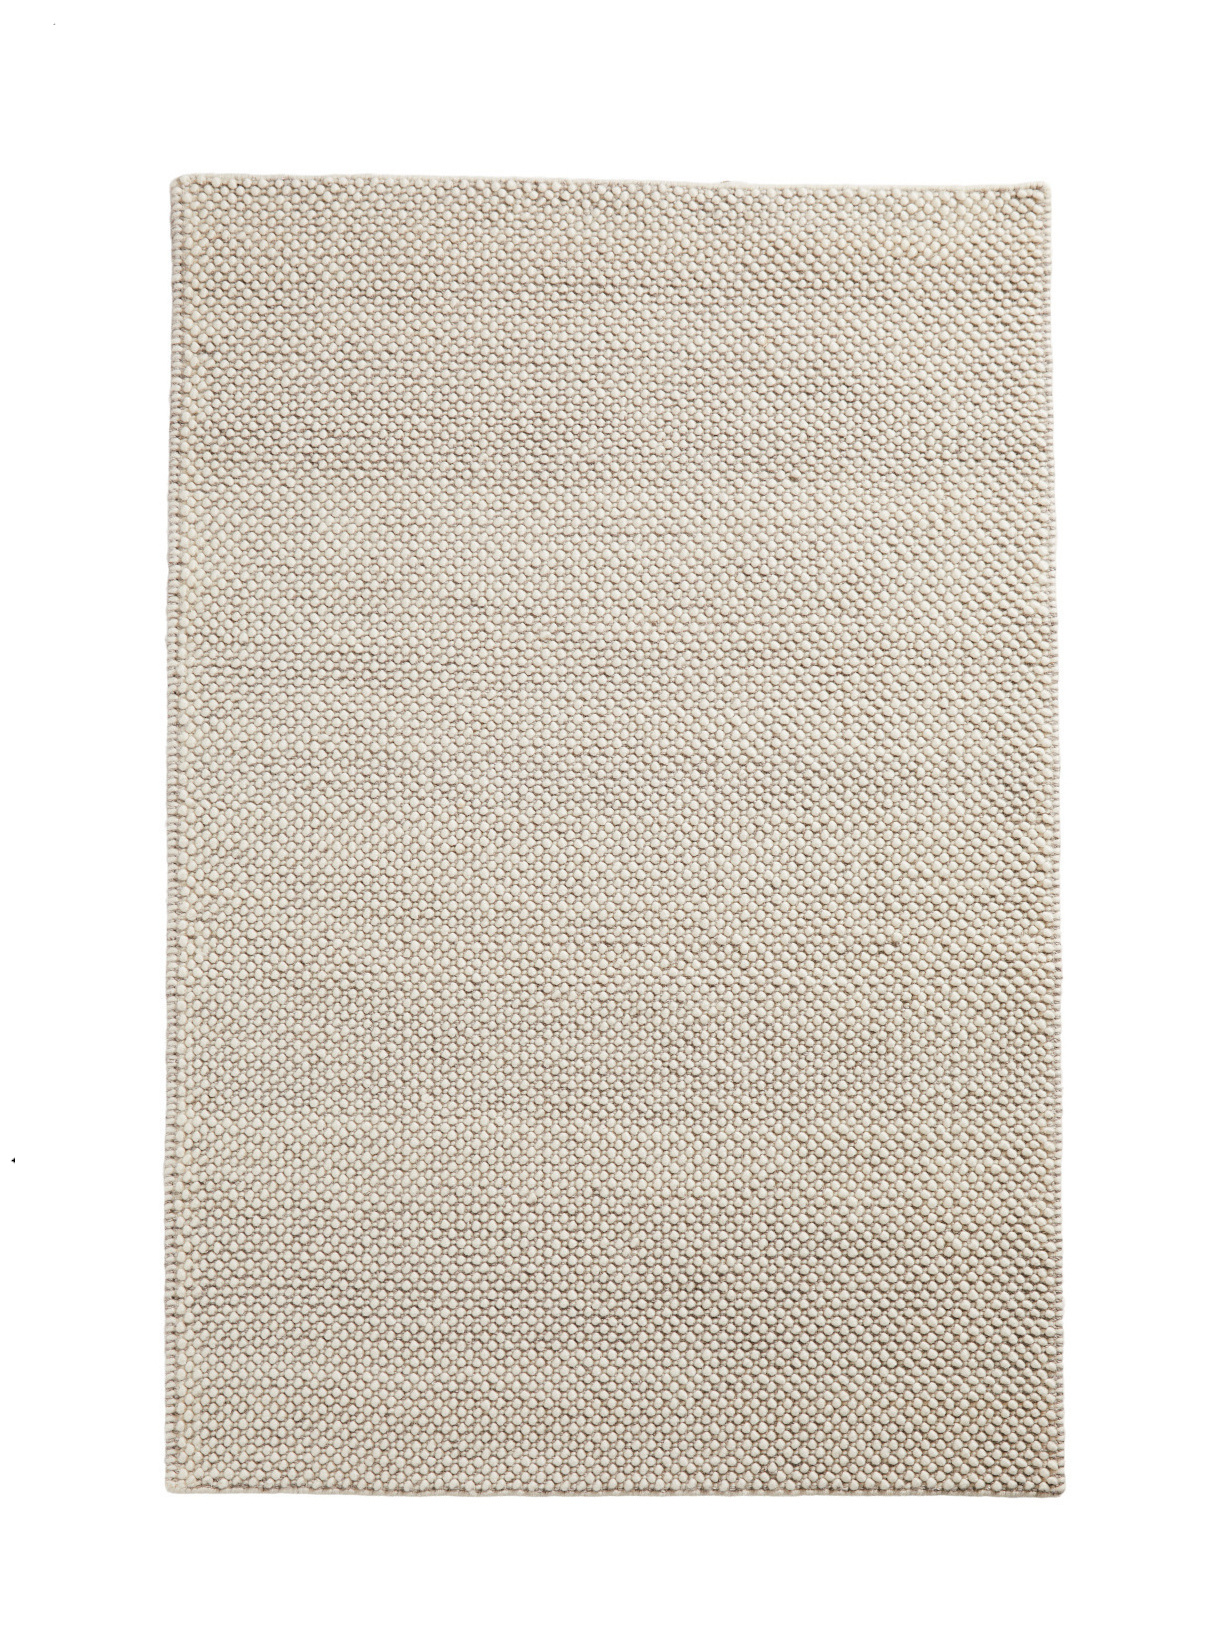 Tact Teppich, 90 x 140 cm, off white